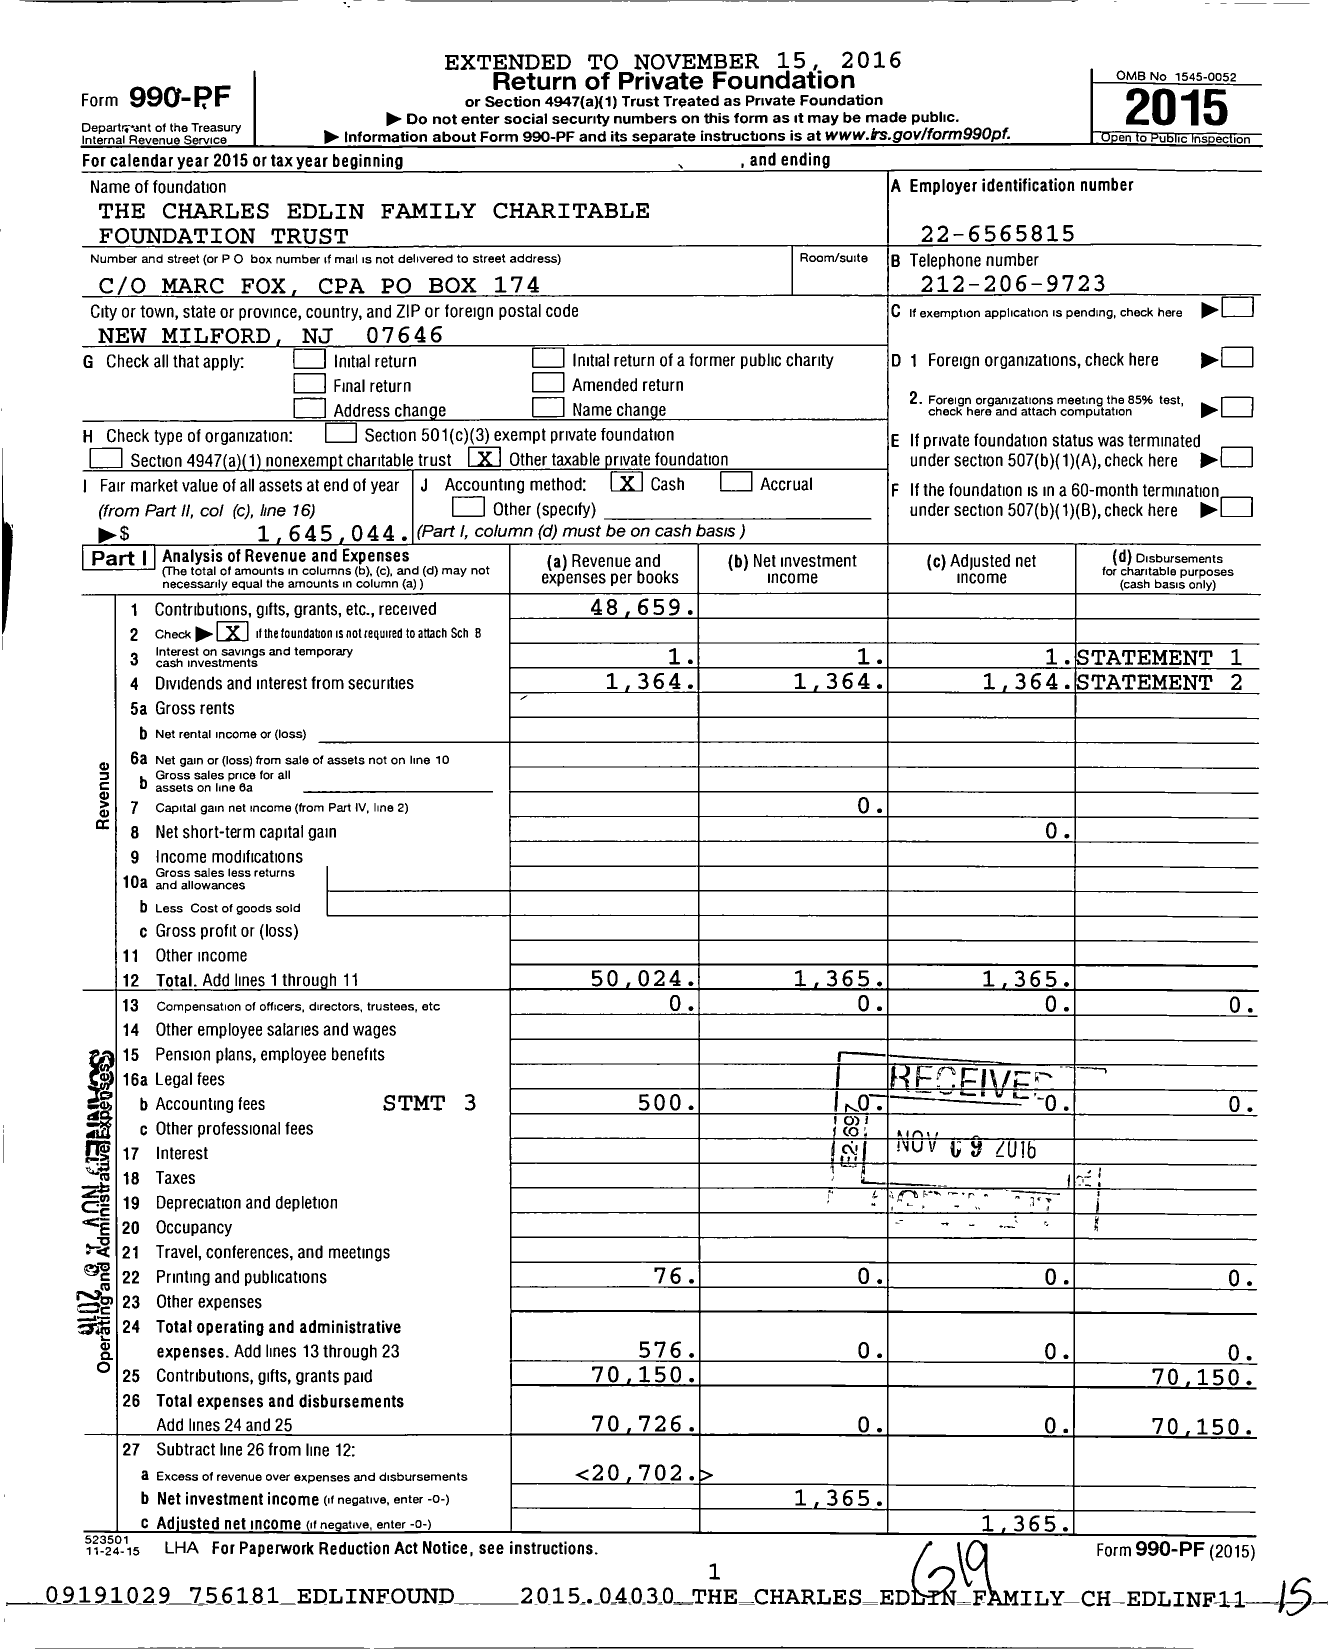 Image of first page of 2015 Form 990PF for Charles Edlin Family Charitable Foundation Trust